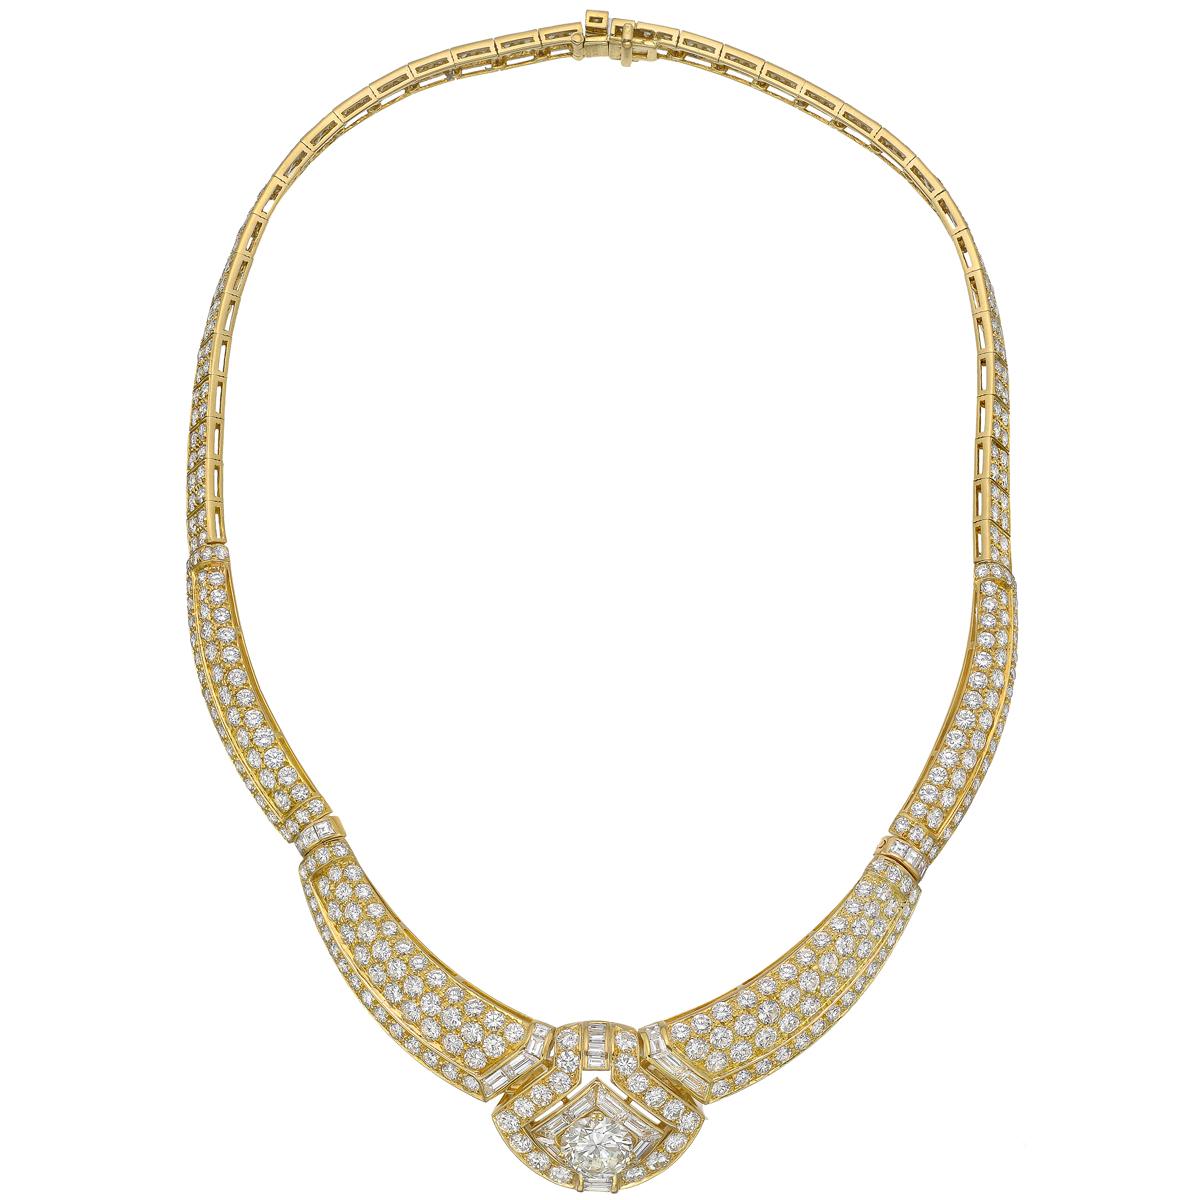 Vintage diamond collar necklace with matching doorknocker-style earrings, featuring fine round and baguette-cut diamonds, set in 18k yellow gold, the necklace and earrings with French hallmarks and maker's marks, the necklace signed